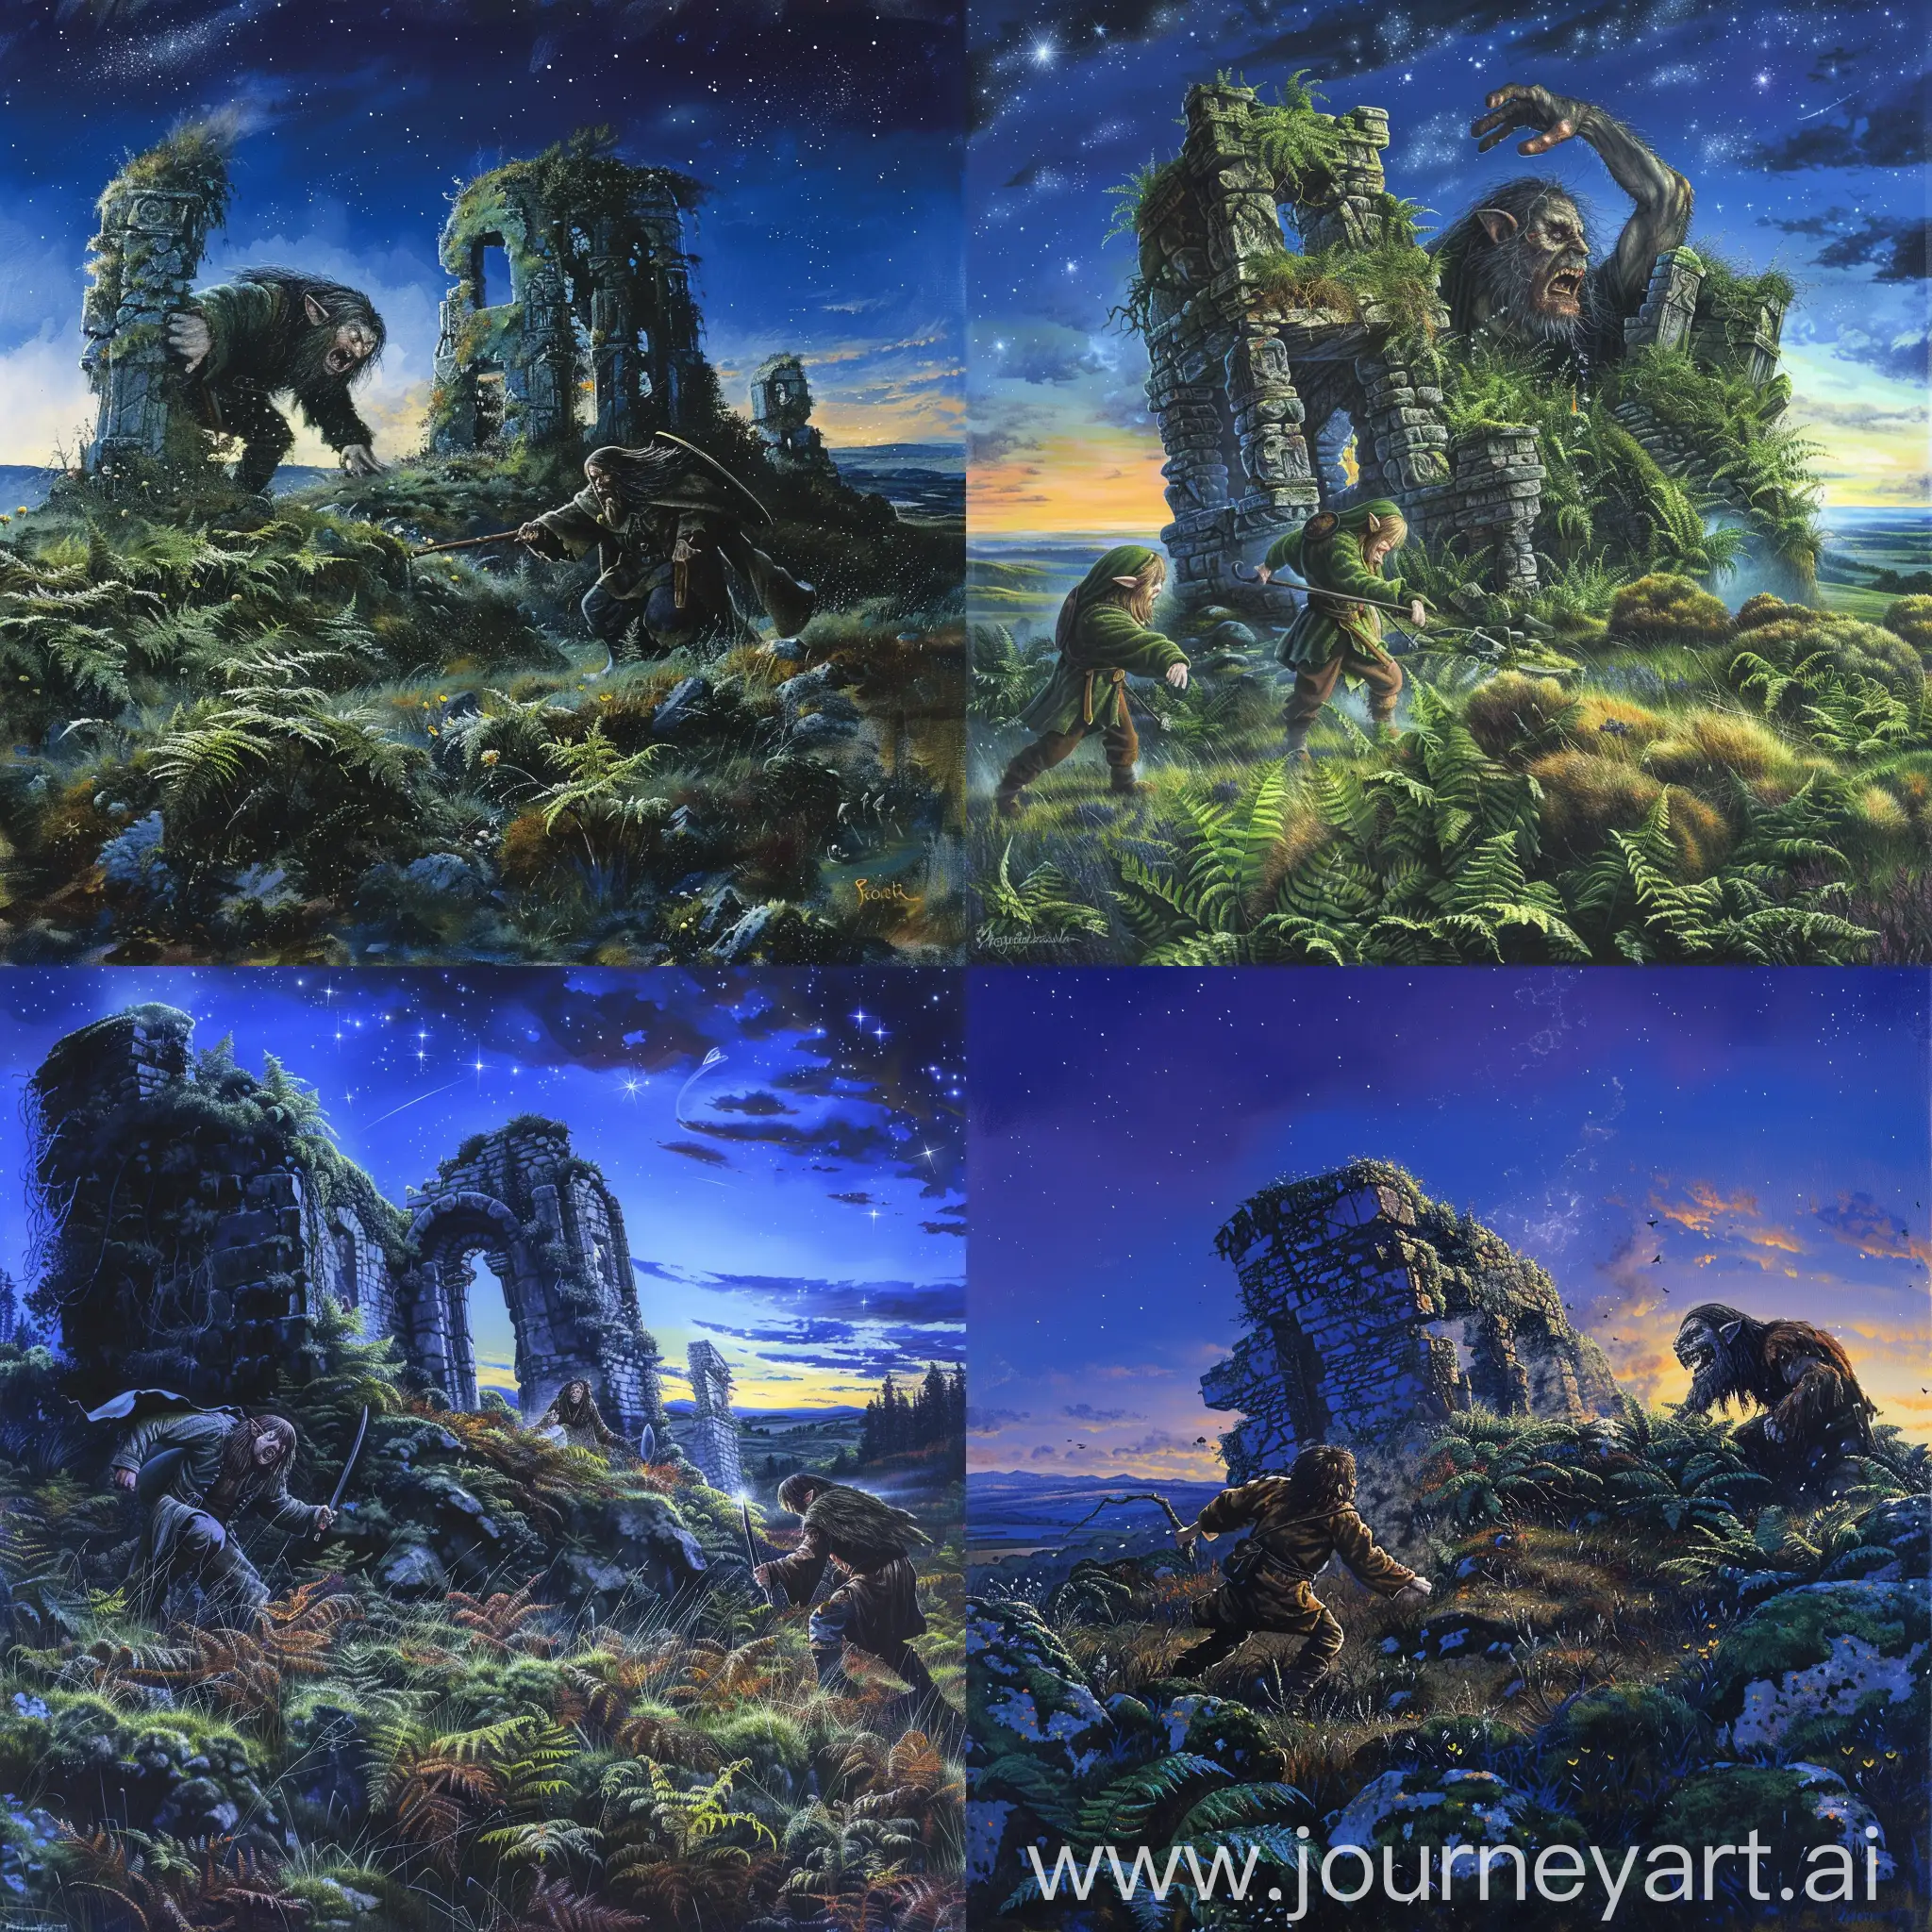 Two hobbits fighting a hill troll in the scrub and fern-covered stone ruins on the moor on a starry night as dawn approaches. Painting.